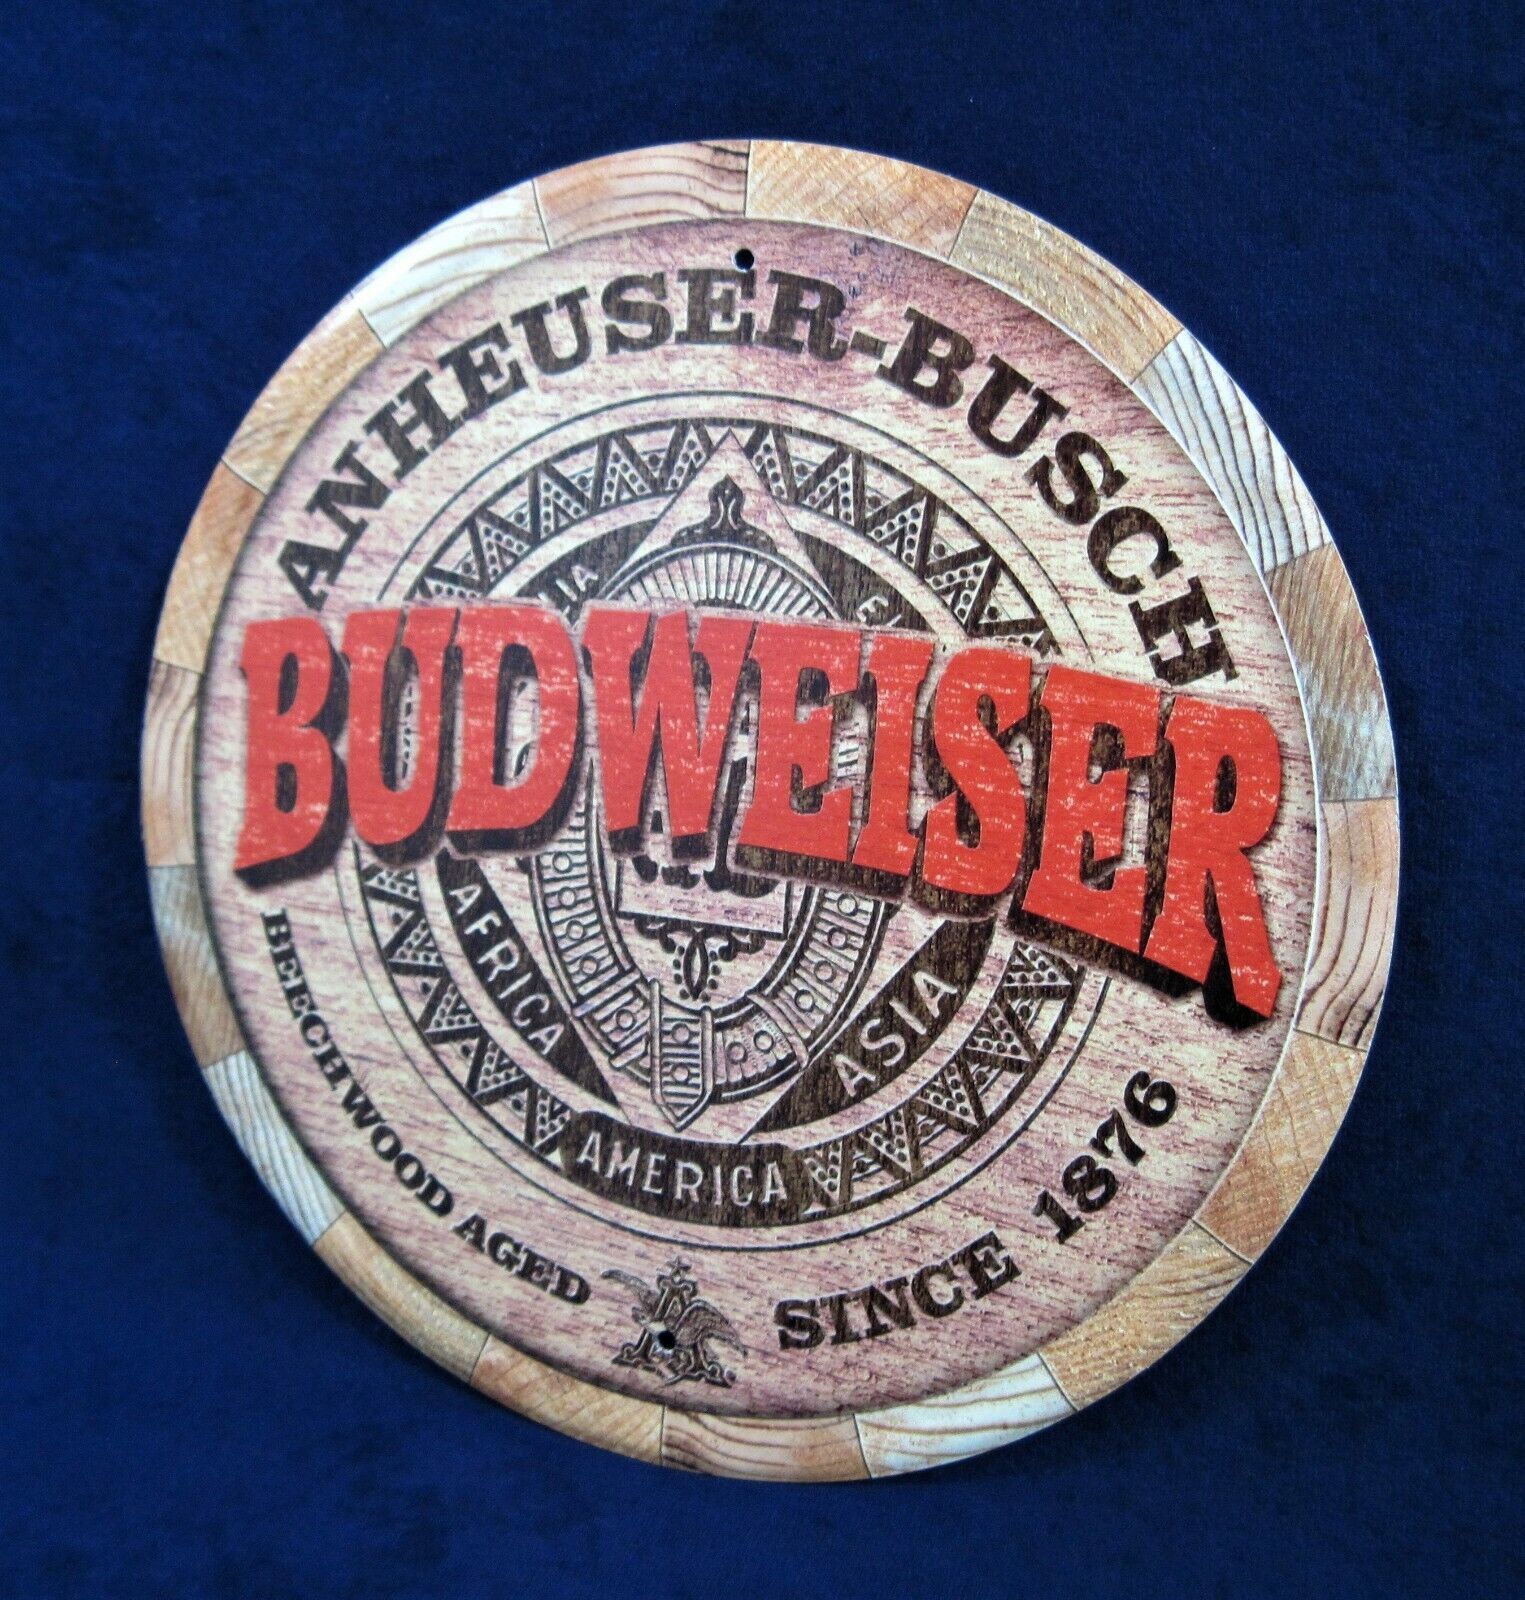 Primary image for BUDWEISER - *US MADE* - Round Metal Sign - Man Cave Garage Bar Pub Wall Décor